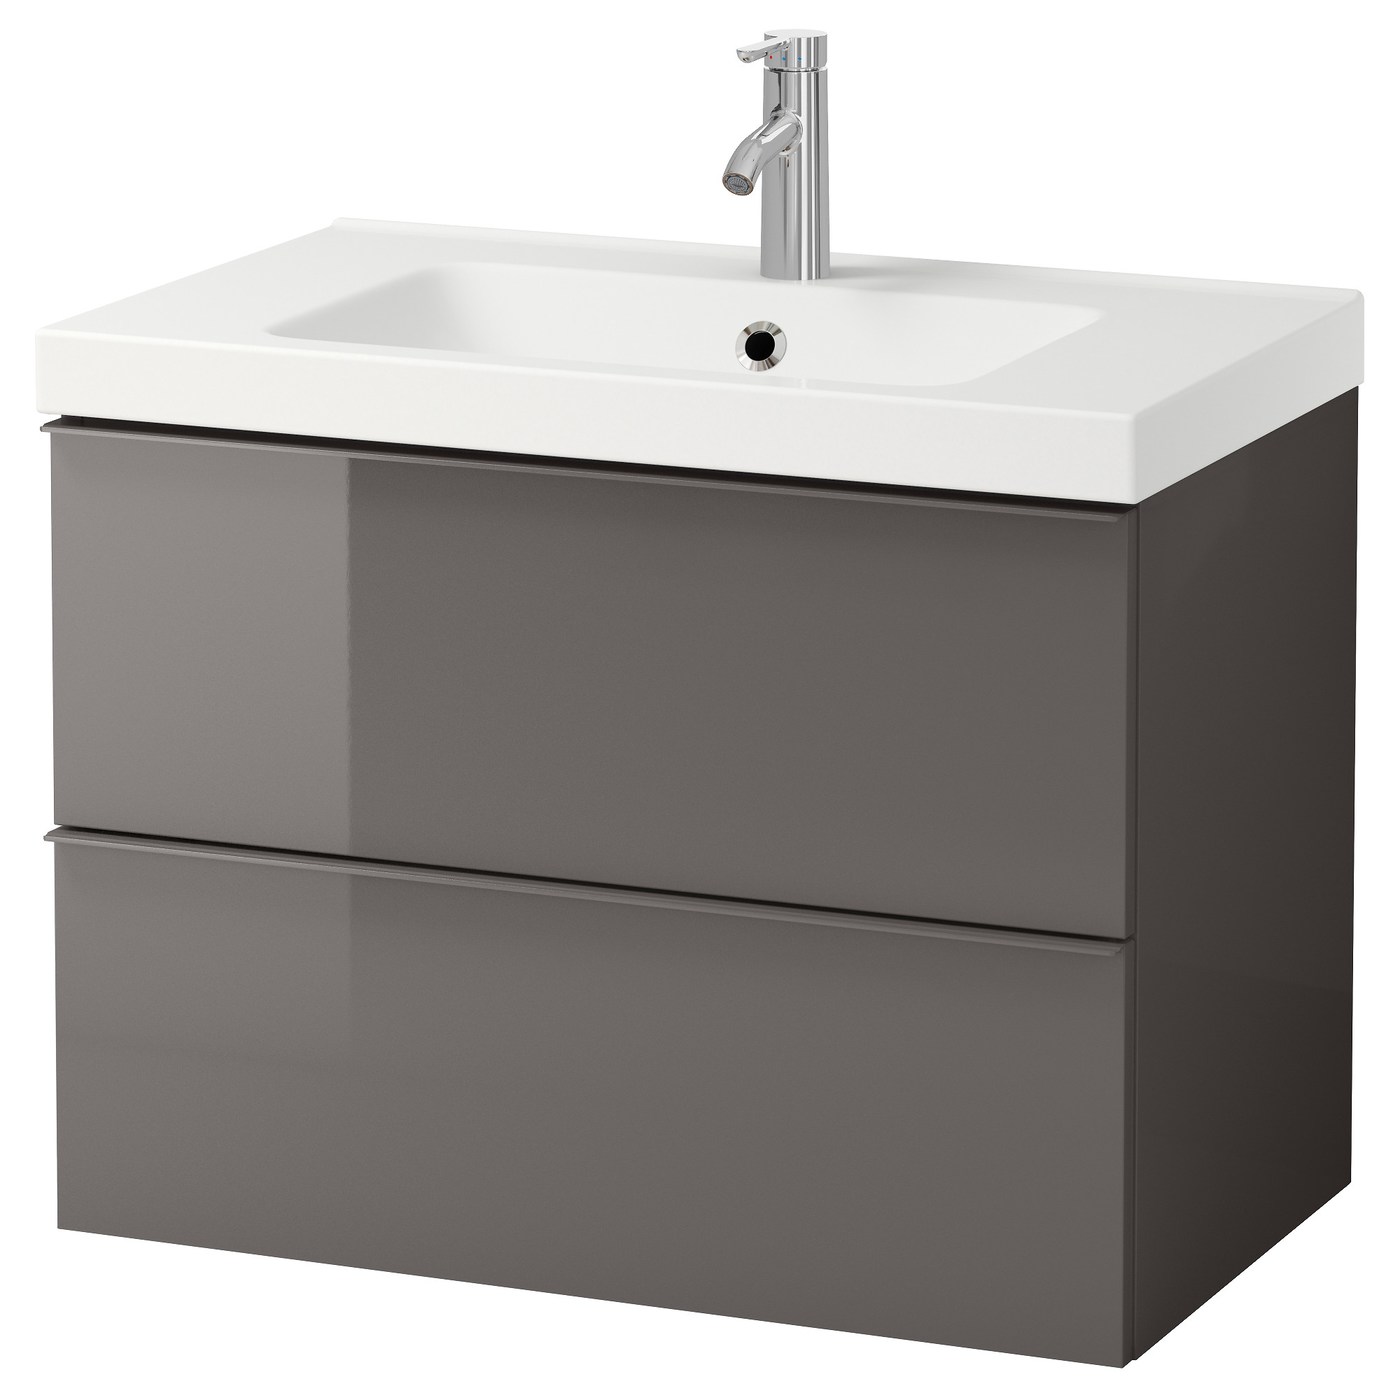 IKEA GODMORGON / ODENSVIK Sink cabinet with 2 drawers